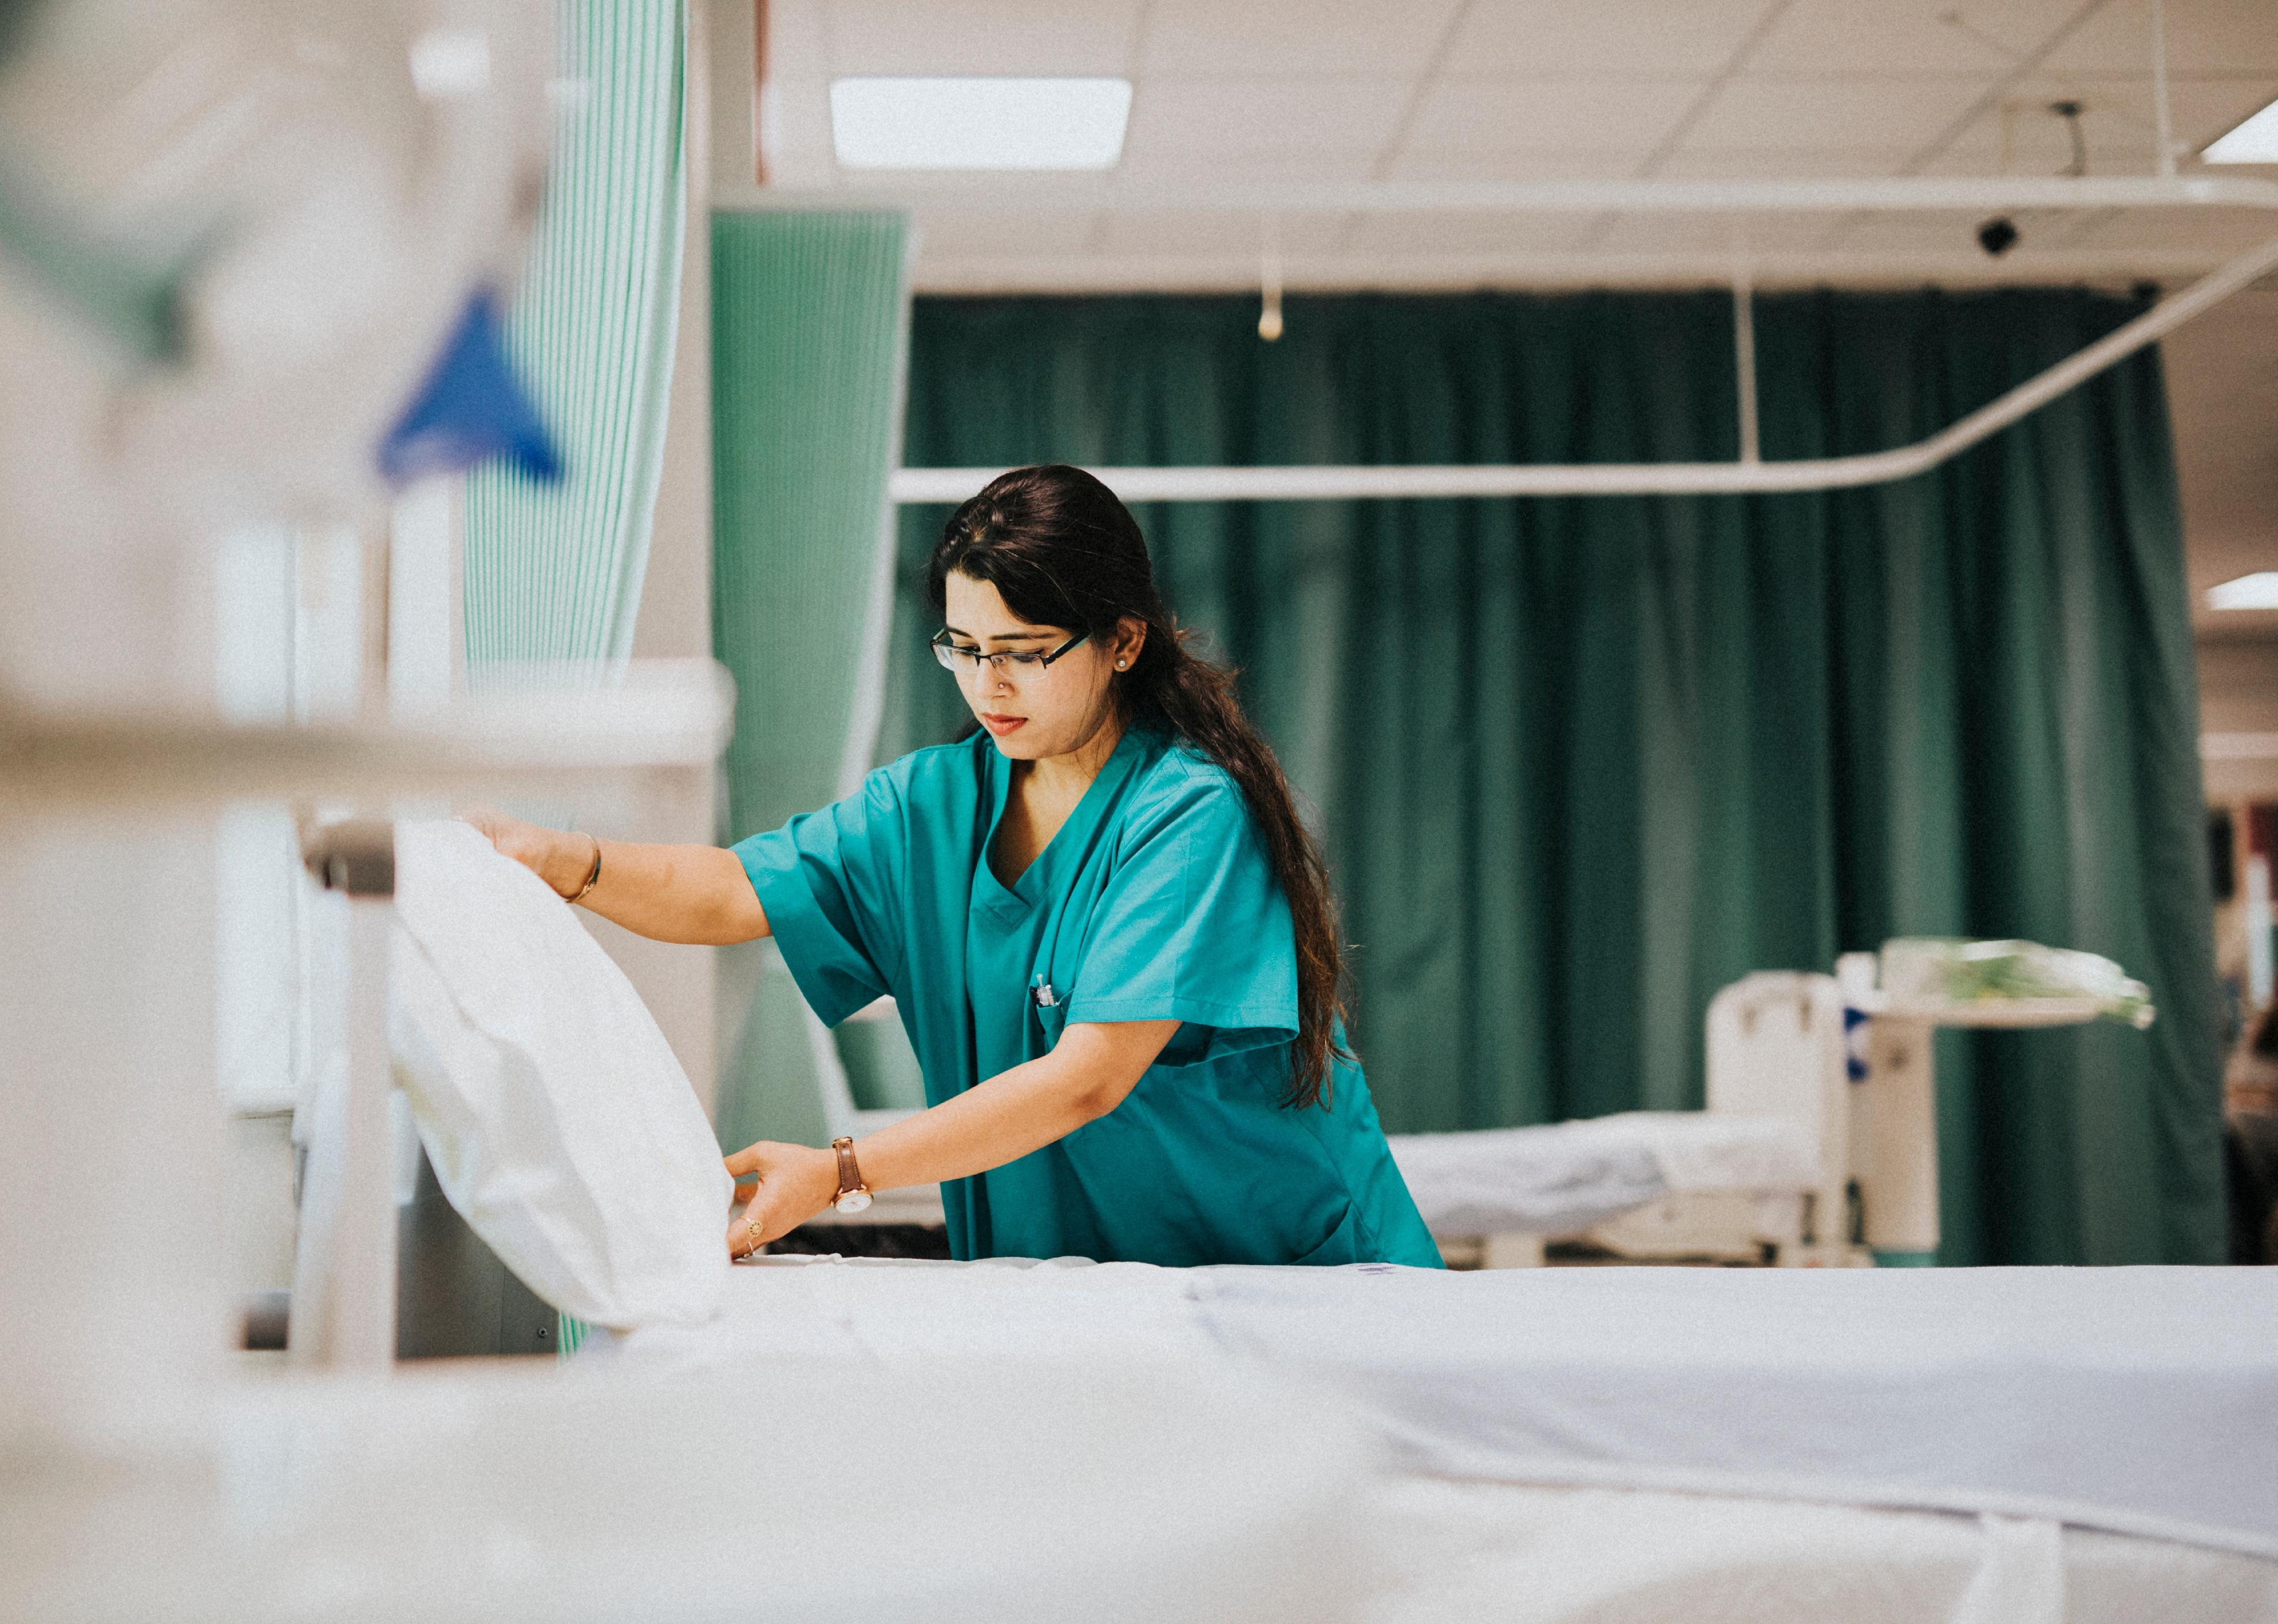 Nurse making the bed at a hospital.